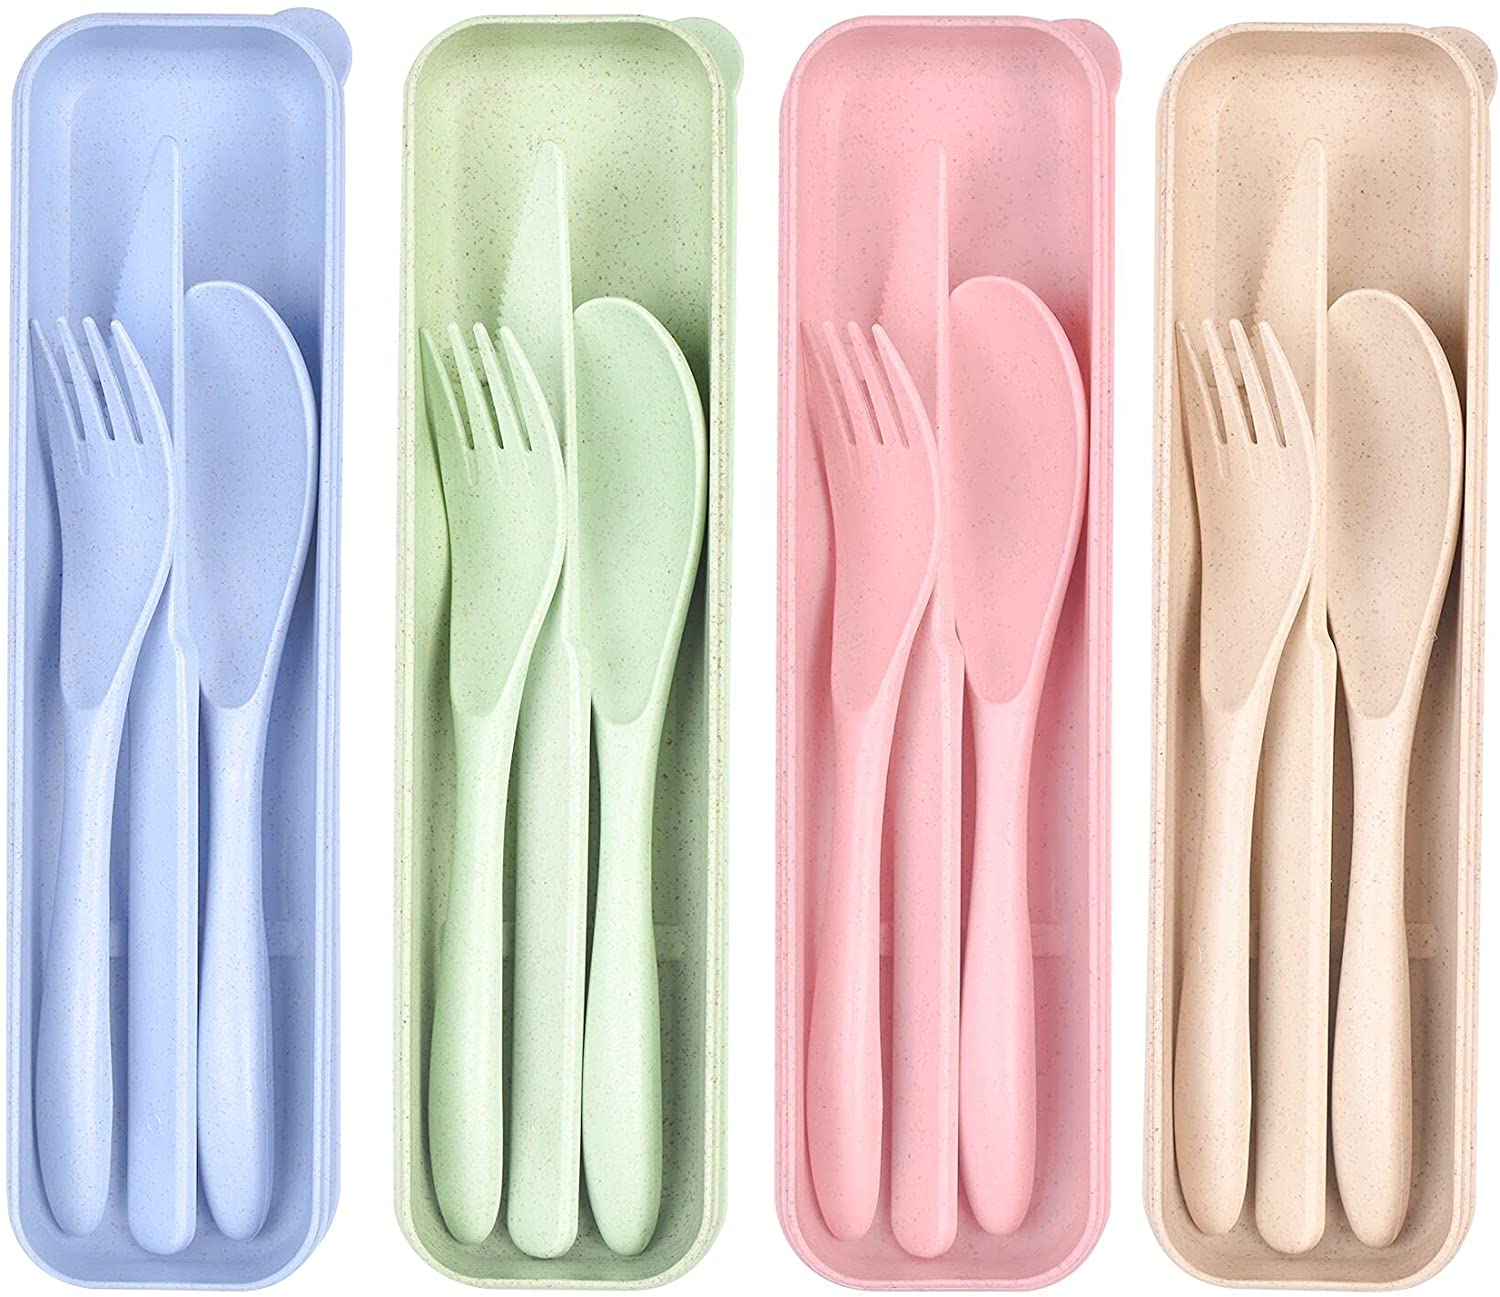 BPA　Daily　Set　Sets　Spoon　Non-Toxin　Utensil　Portable　Cutlery　or　with　Travel　Tableware,　Friendly　Camping　Reusable　Case,　Straw　Picnic　Eco　Wheat　for　Forks　Travel　Free　Knife　Use